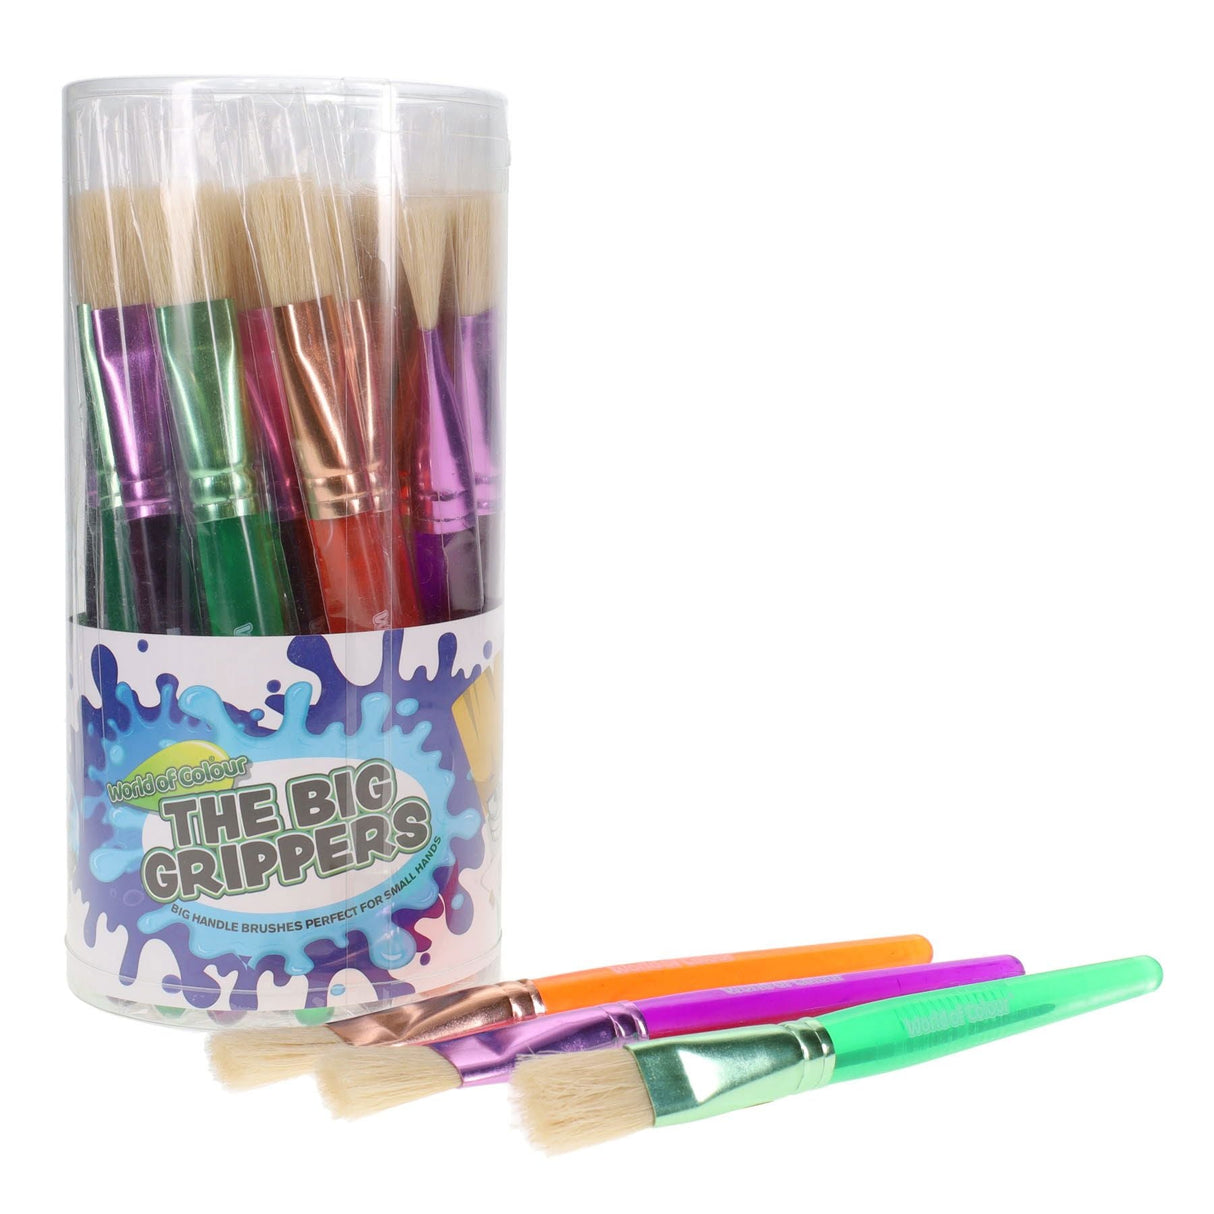 World of Colour The Big Grippers Paint Brush - Flat Head - Tub of 30 | Stationery Shop UK